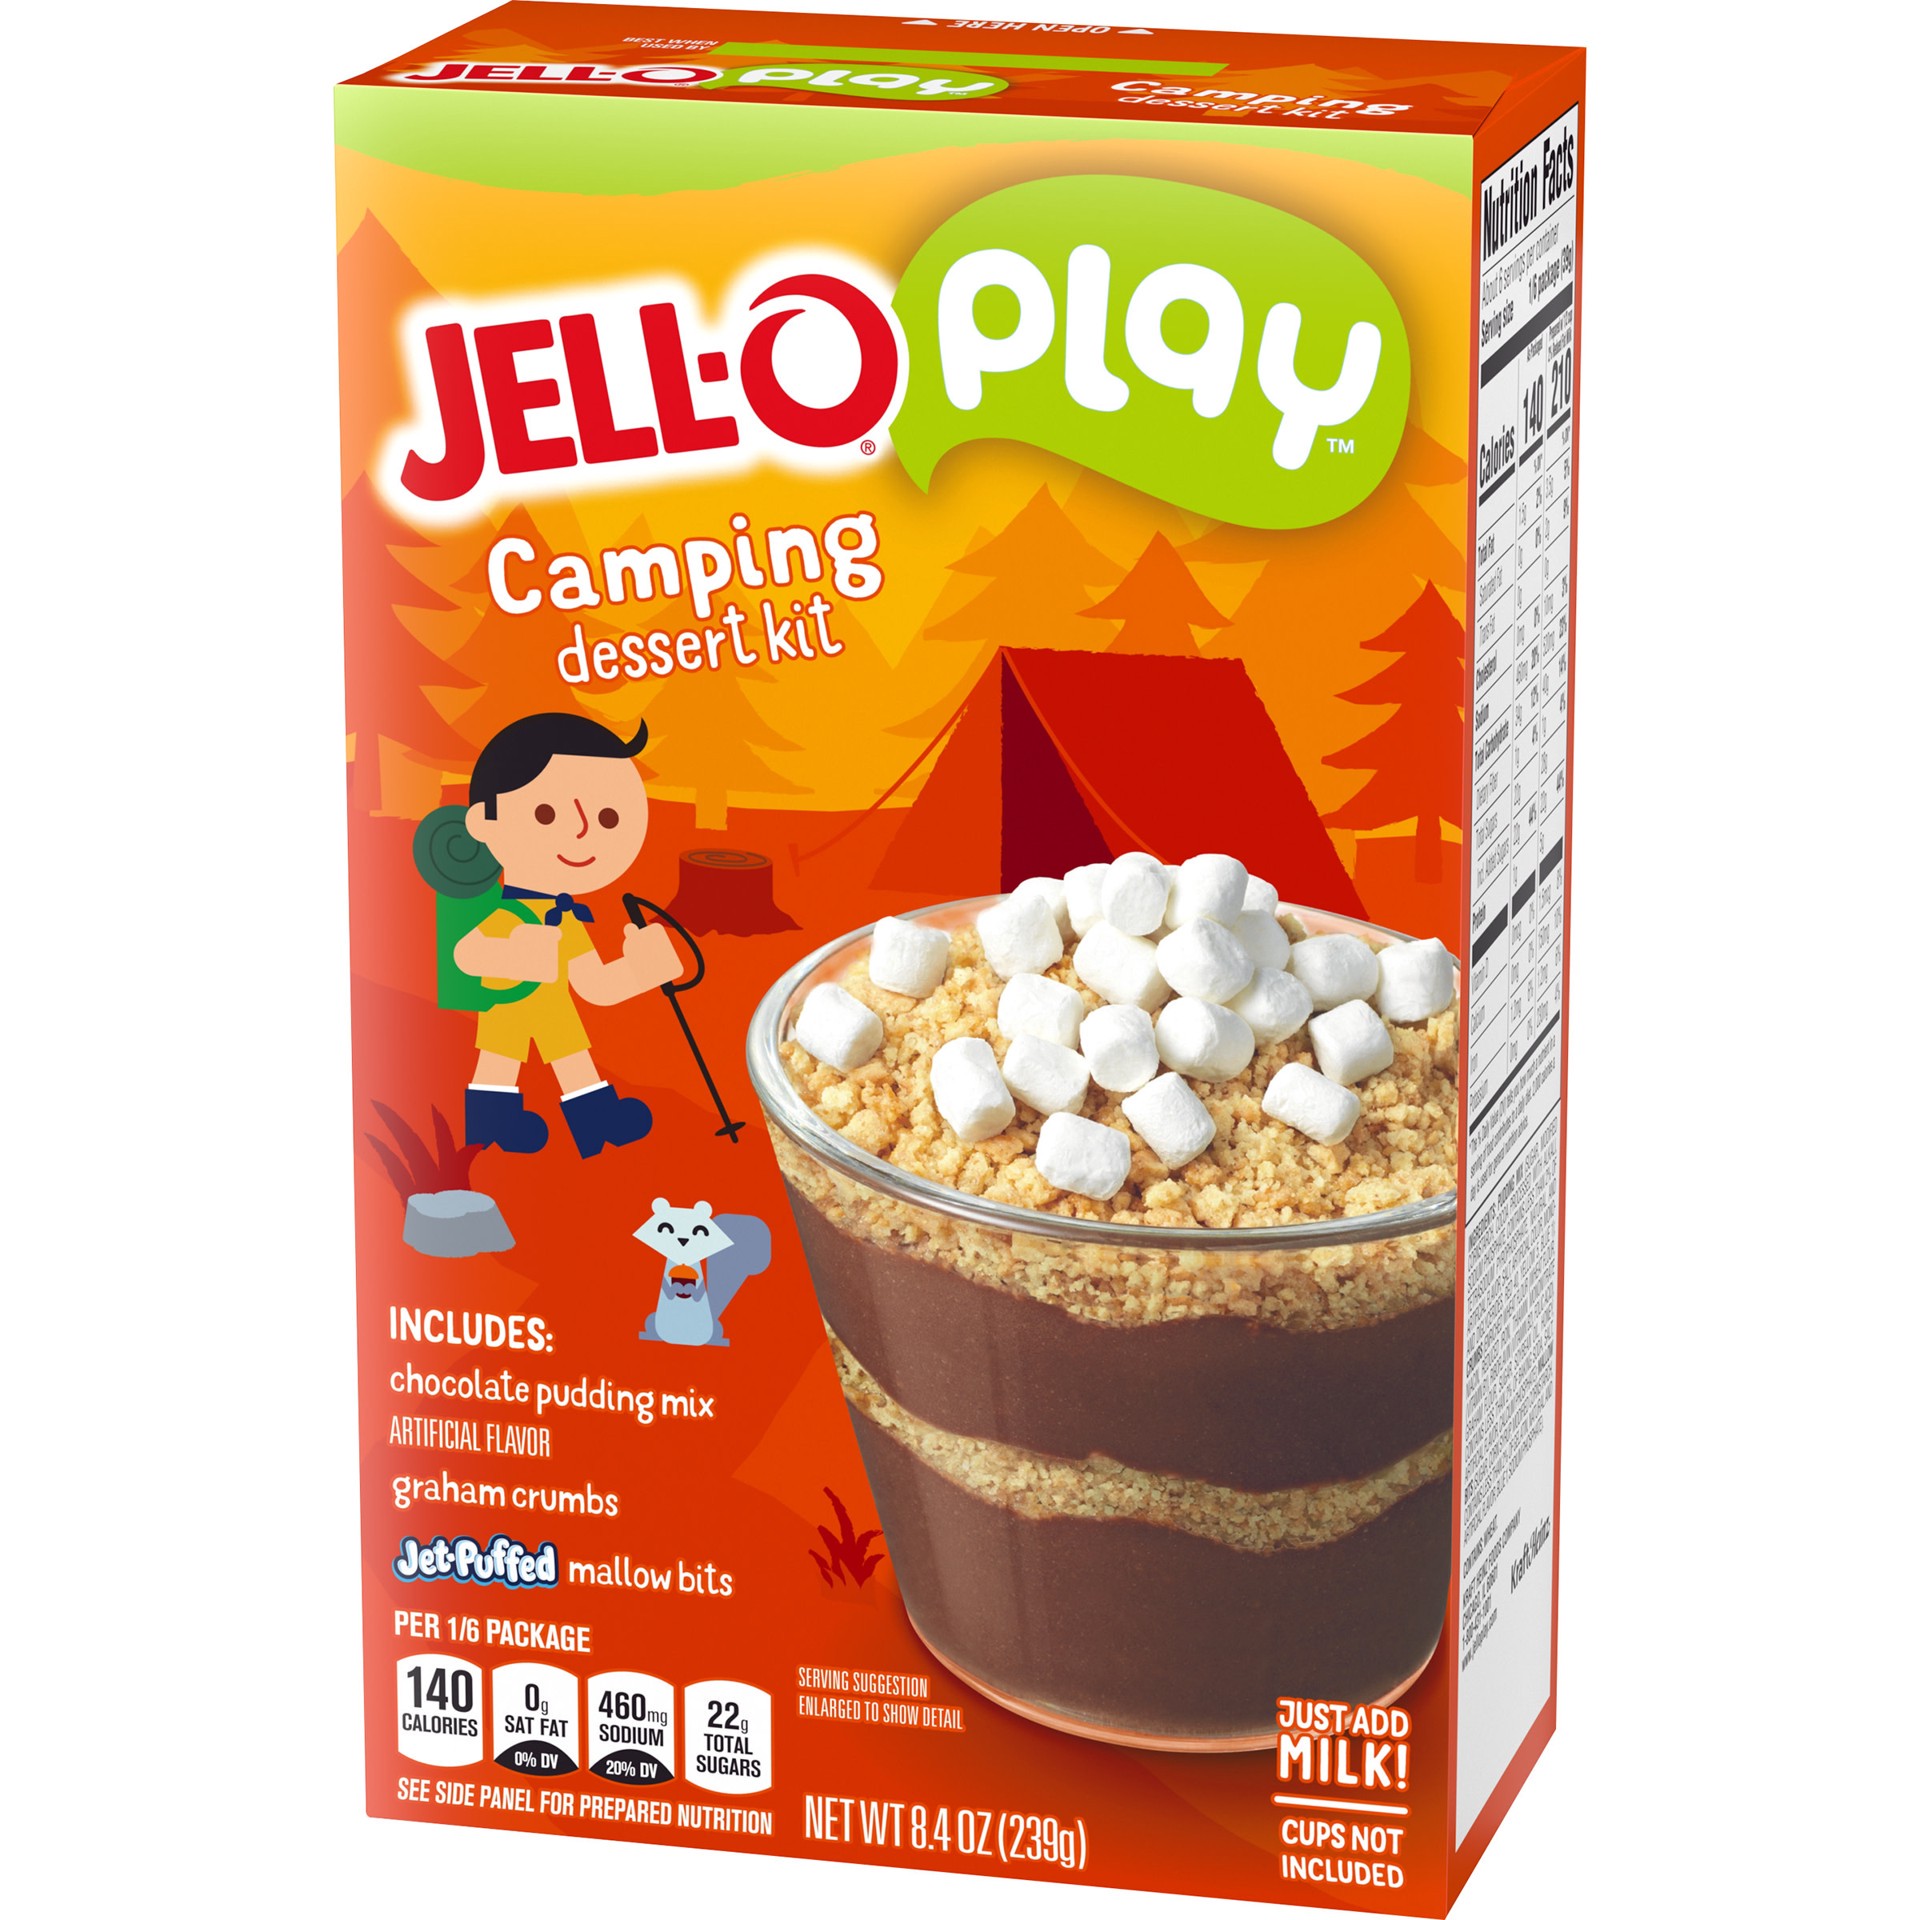 slide 6 of 11, Jell-O Play Camping Dessert Kit with Chocolate Pudding Mix, Graham Crumbs & Jet-Puffed Marshmallow Bits, 8.4 oz Box, 8.4 oz